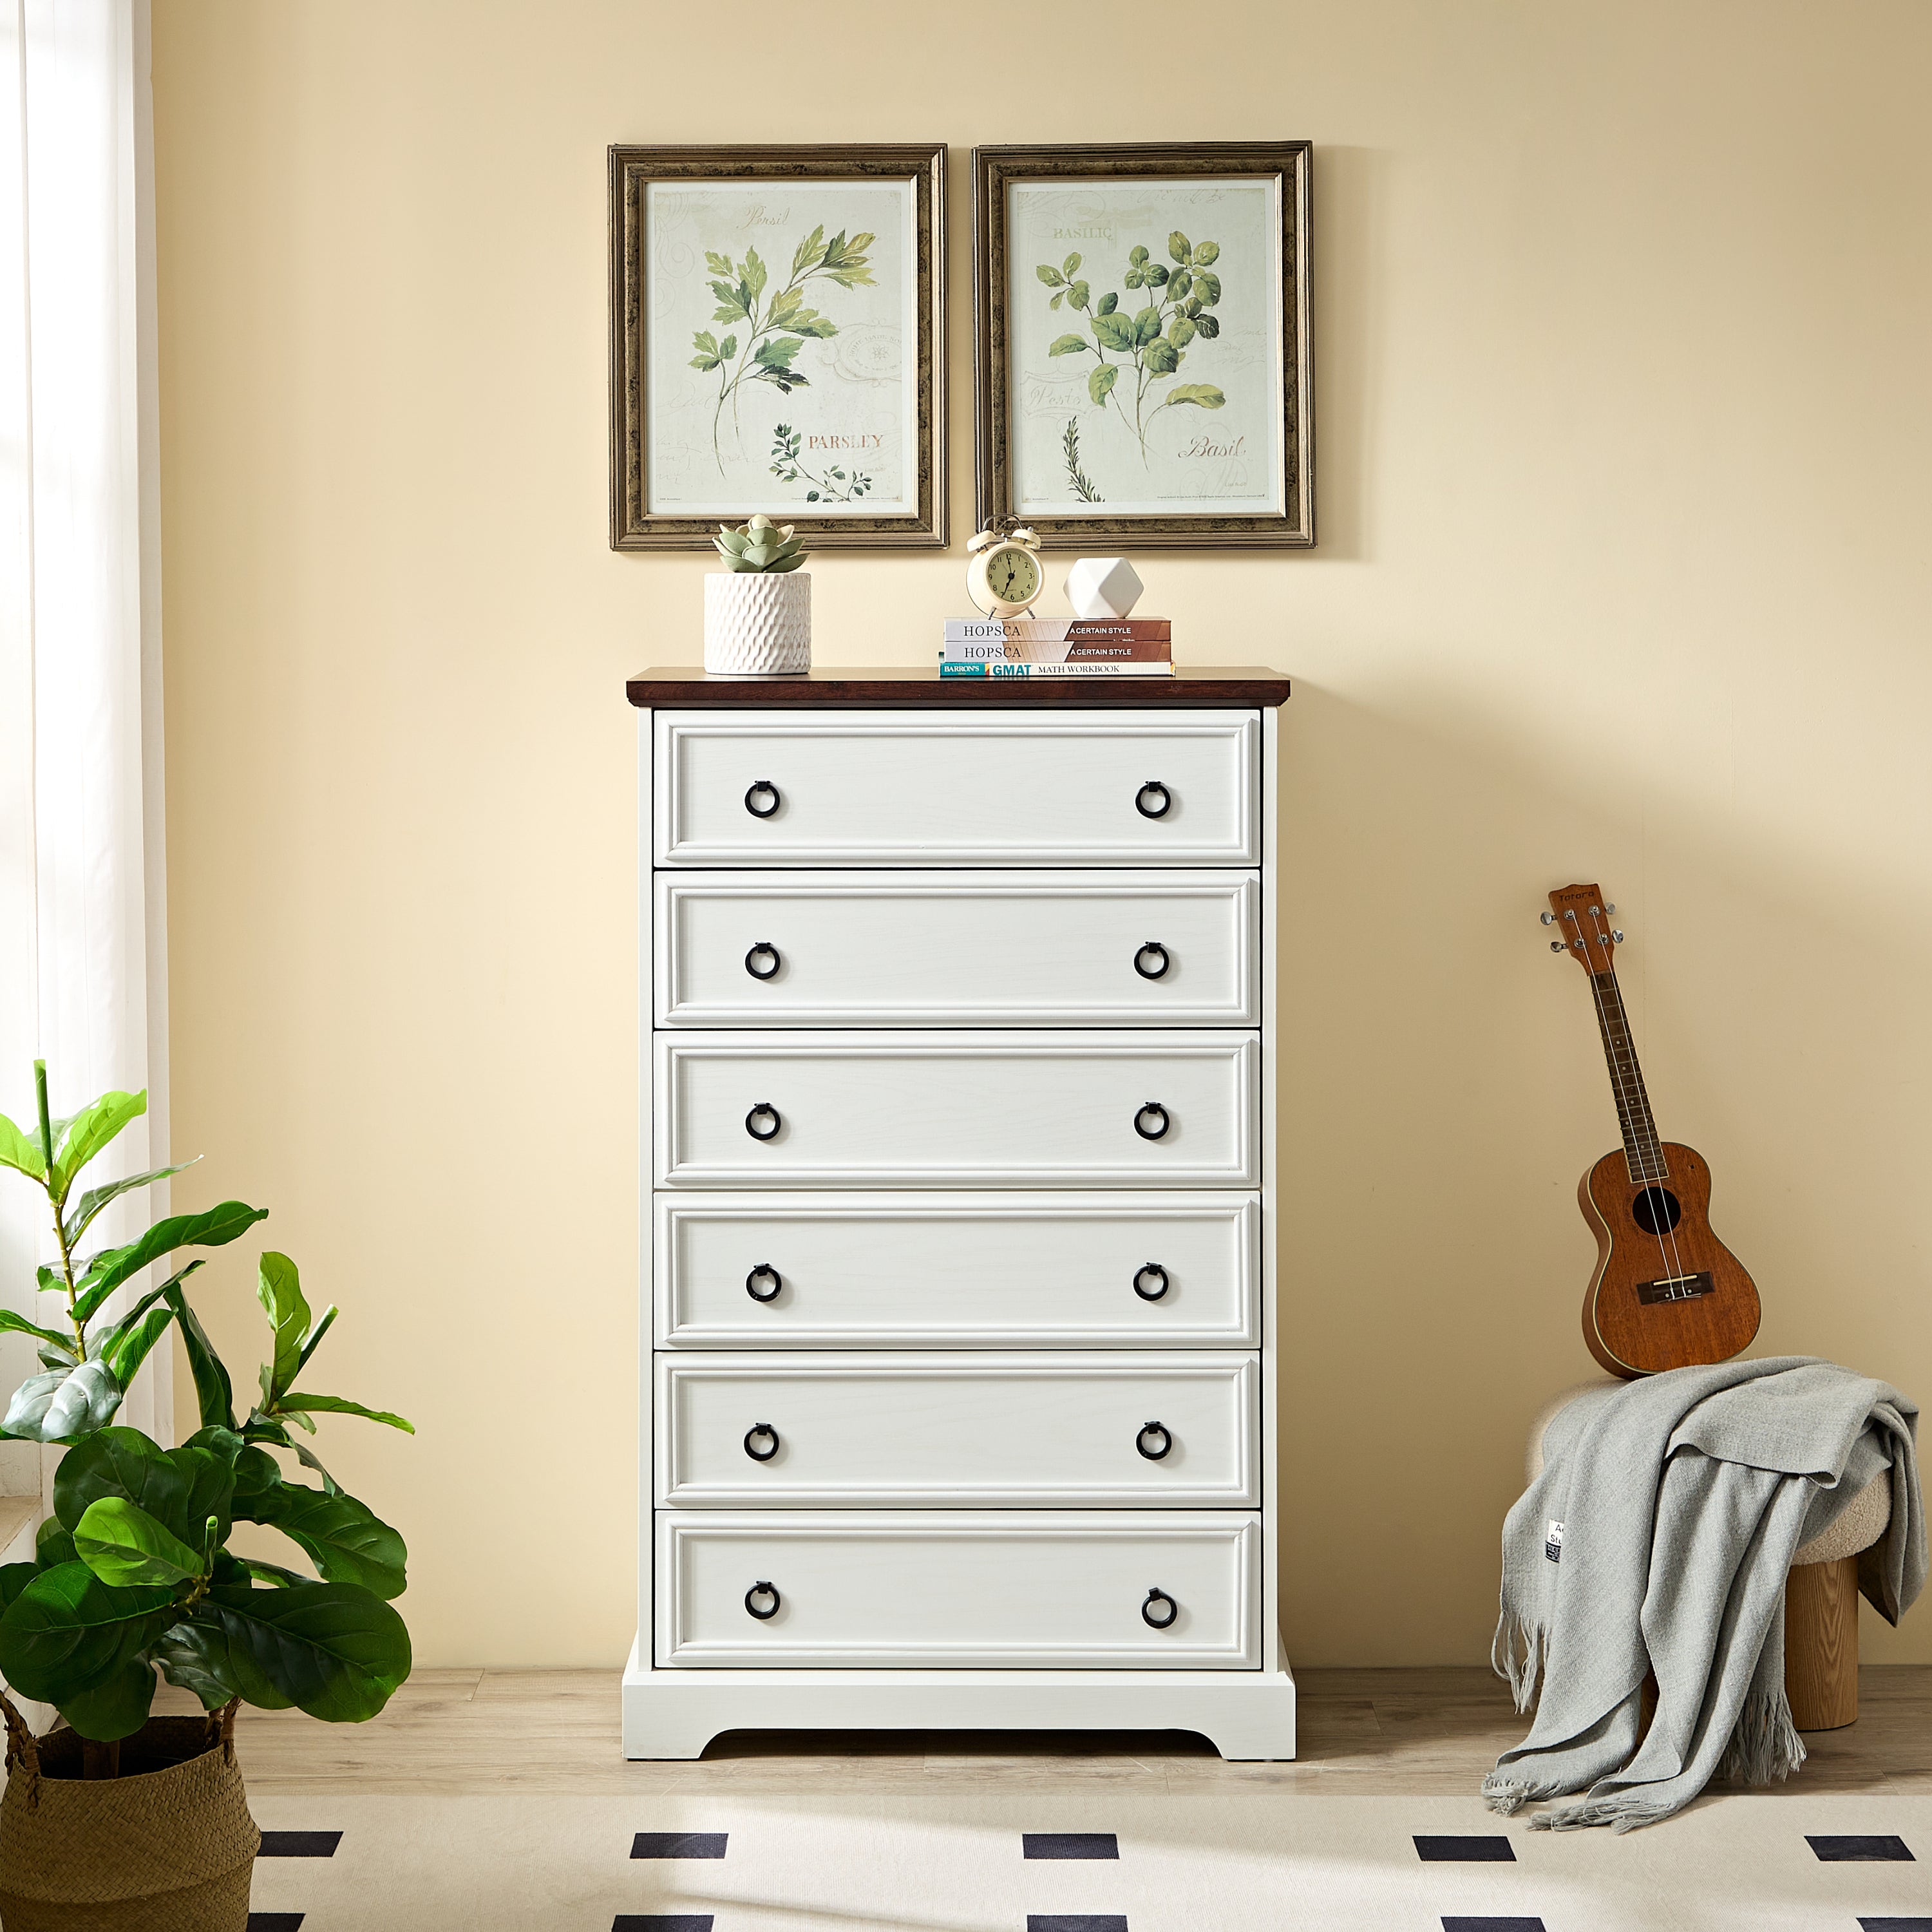 Modern 6 Drawer Dresser, Dressers for Bedroom, Tall Chest of Drawers Closet Organizers & Storage Clothes - Easy Pull Handle, Textured Borders Living Room, Hallway,L 29.53''*W15.75''*H48.03''White